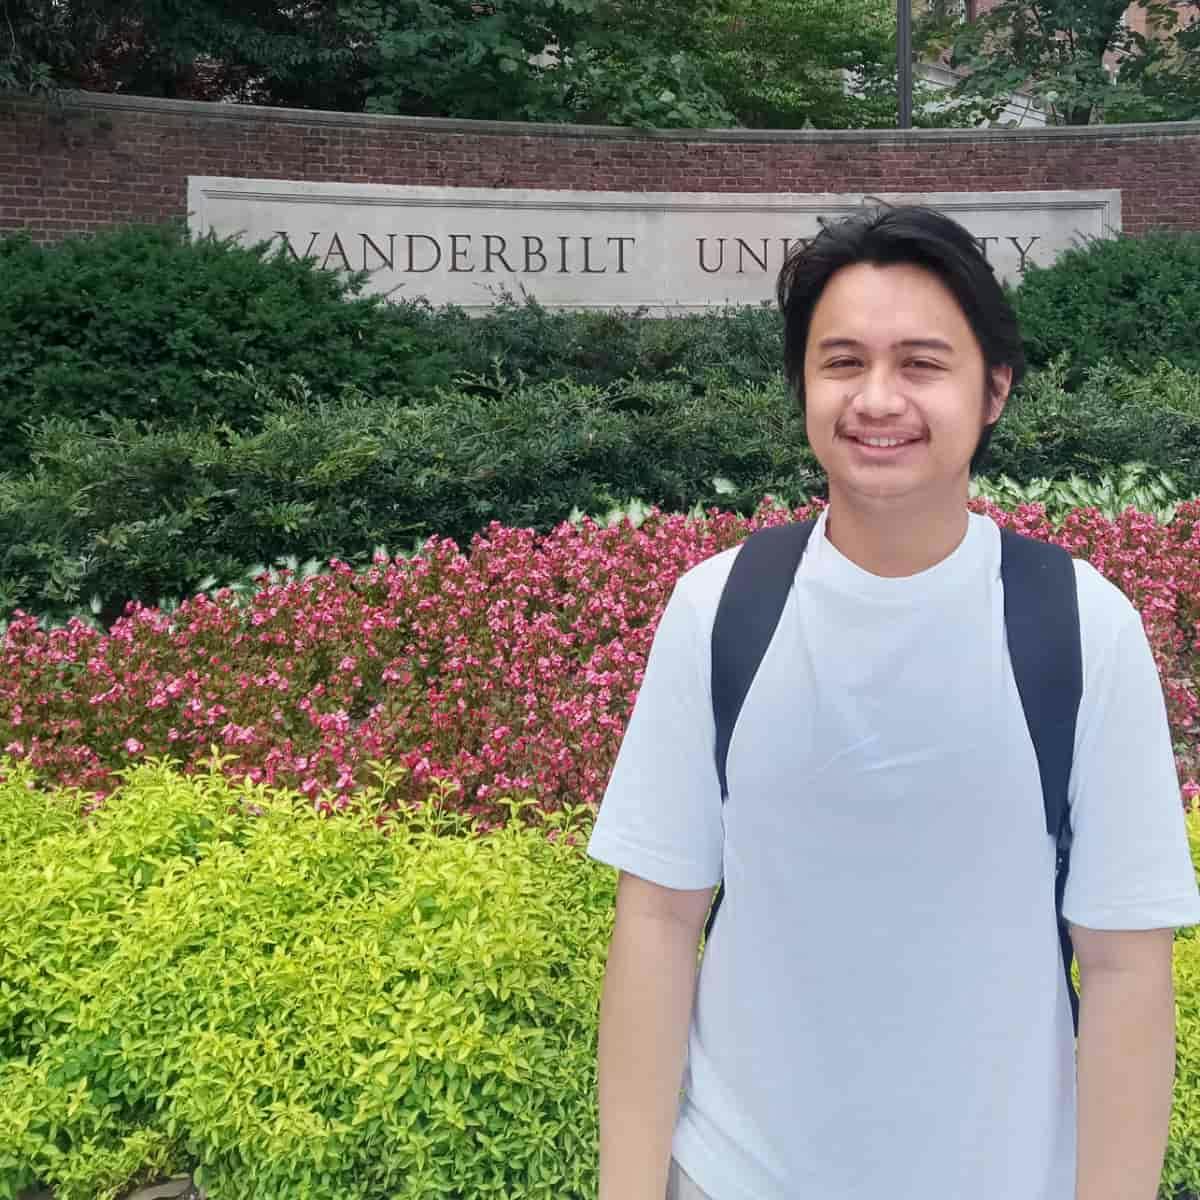 From the Philippines to Vanderbilt - how to market yourself to get into T20 school with financial aid